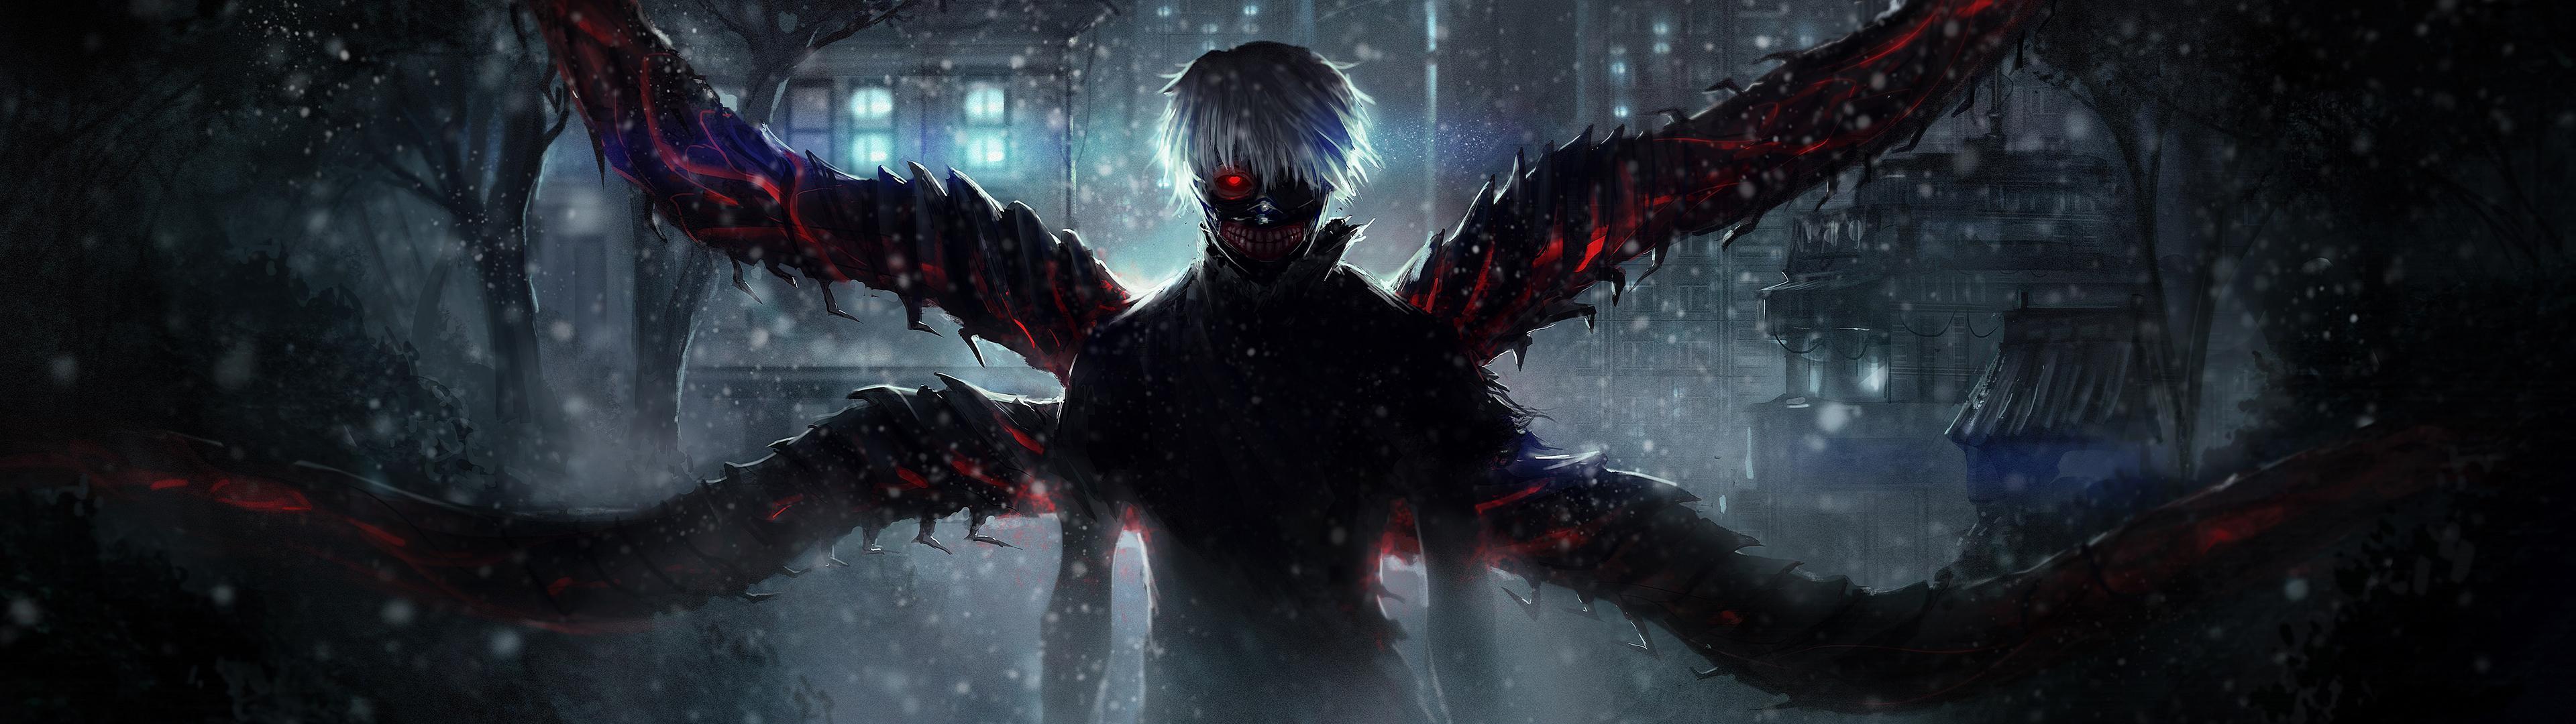 20+ Awesome Dual Monitor Anime Wallpapers Collection